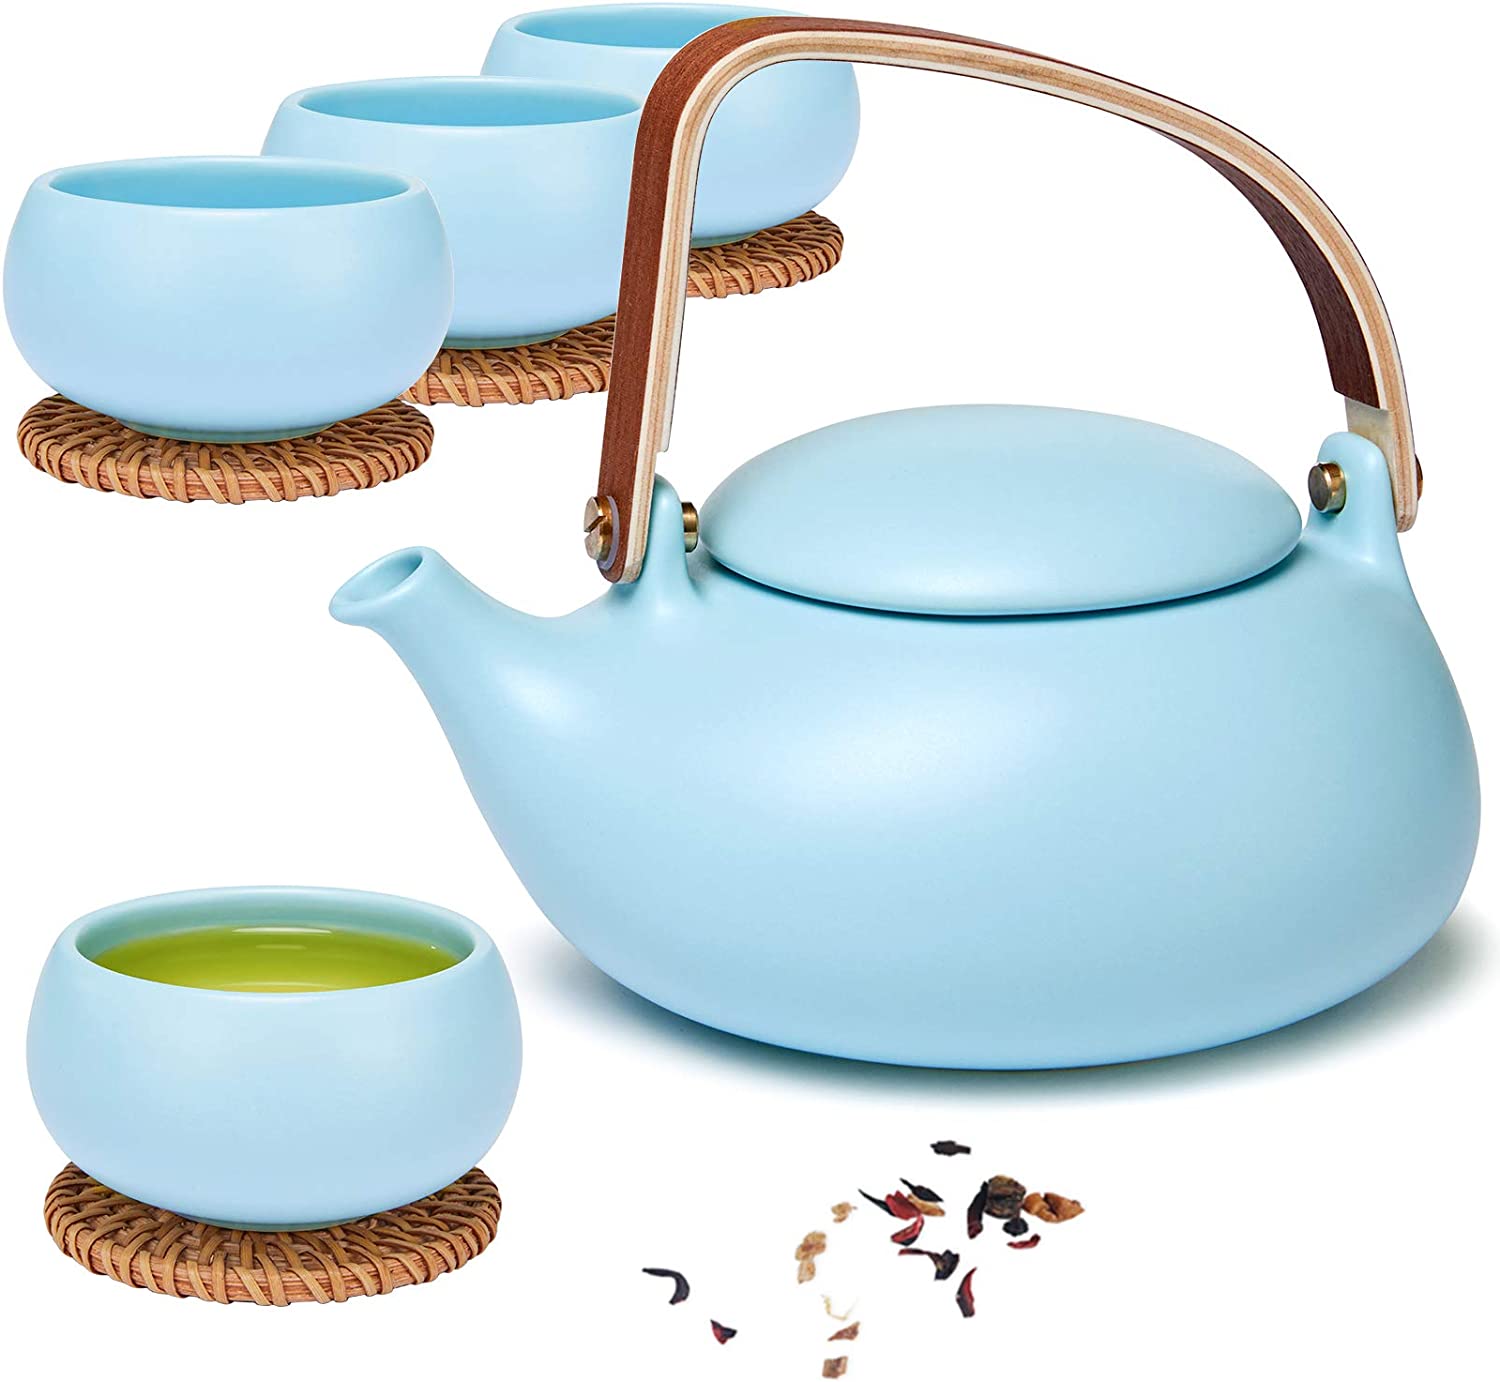 ZENS Porcelain Teapot with Strainer Insert, 800 ml Wooden Handle, Matt Japanese Tea Service Ceramic with 4 Cups and Rattan Coasters for Loose Tea Gift/Blue